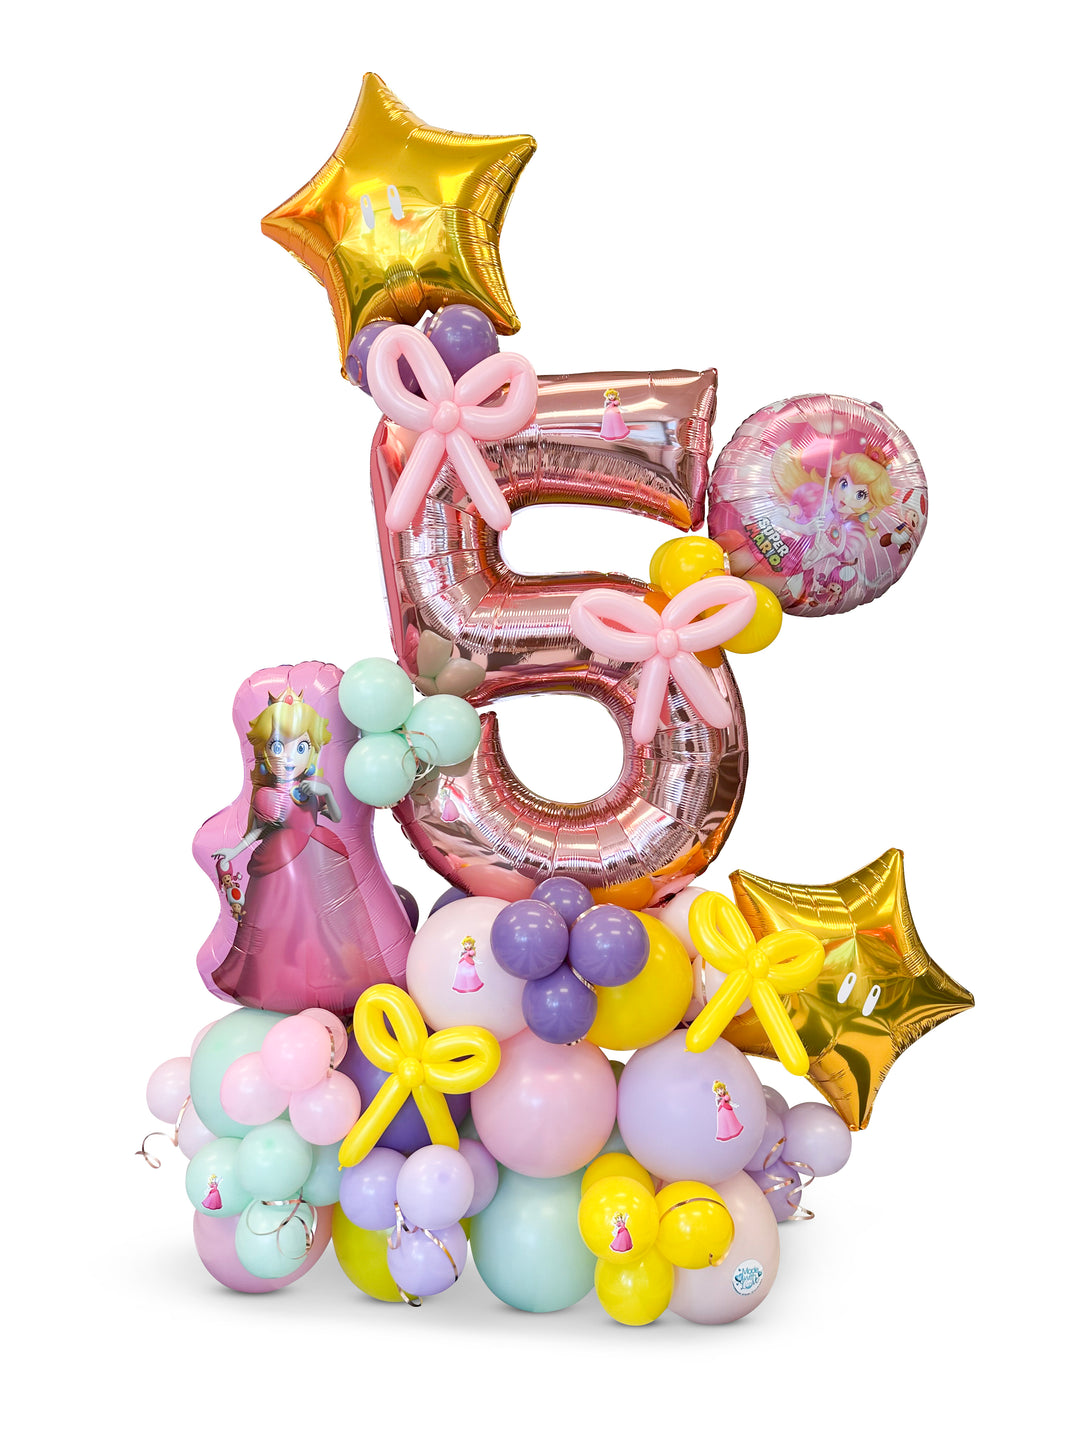 Princess Peach balloon Number cluster stand